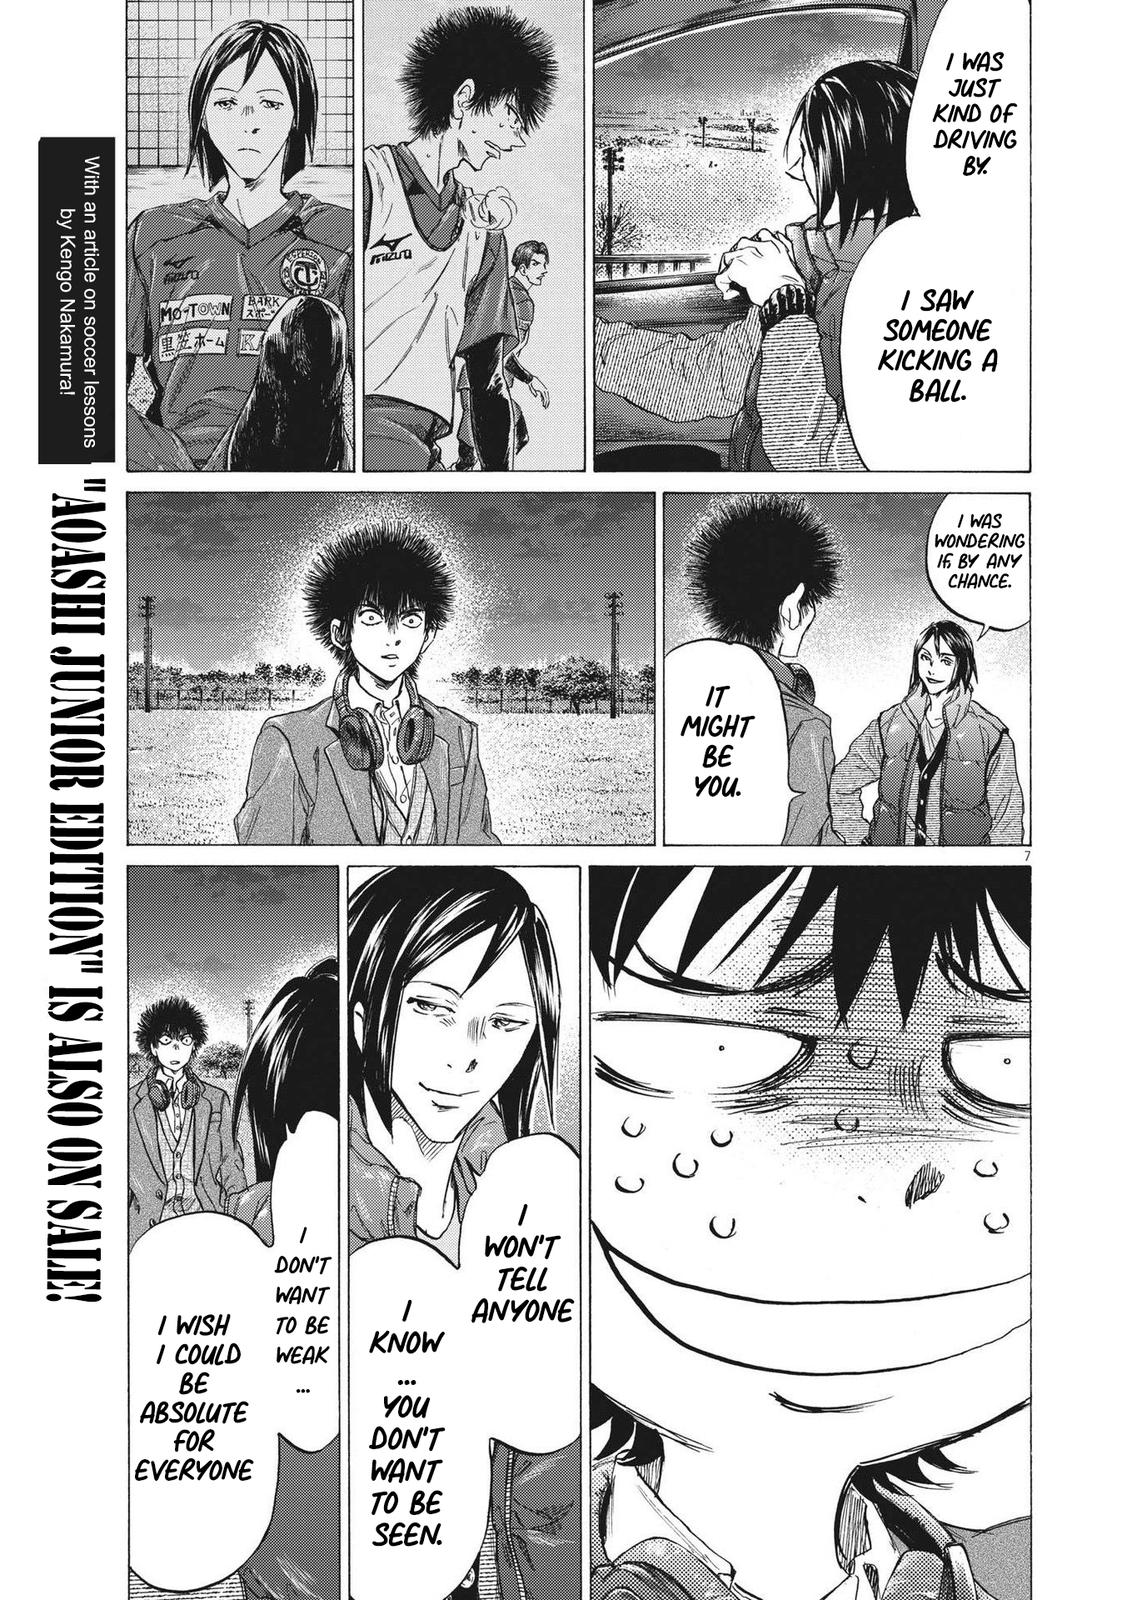 Ao Ashi, Chapter 234  TcbScans Net - TCBscans - Free Manga Online in High  Quality